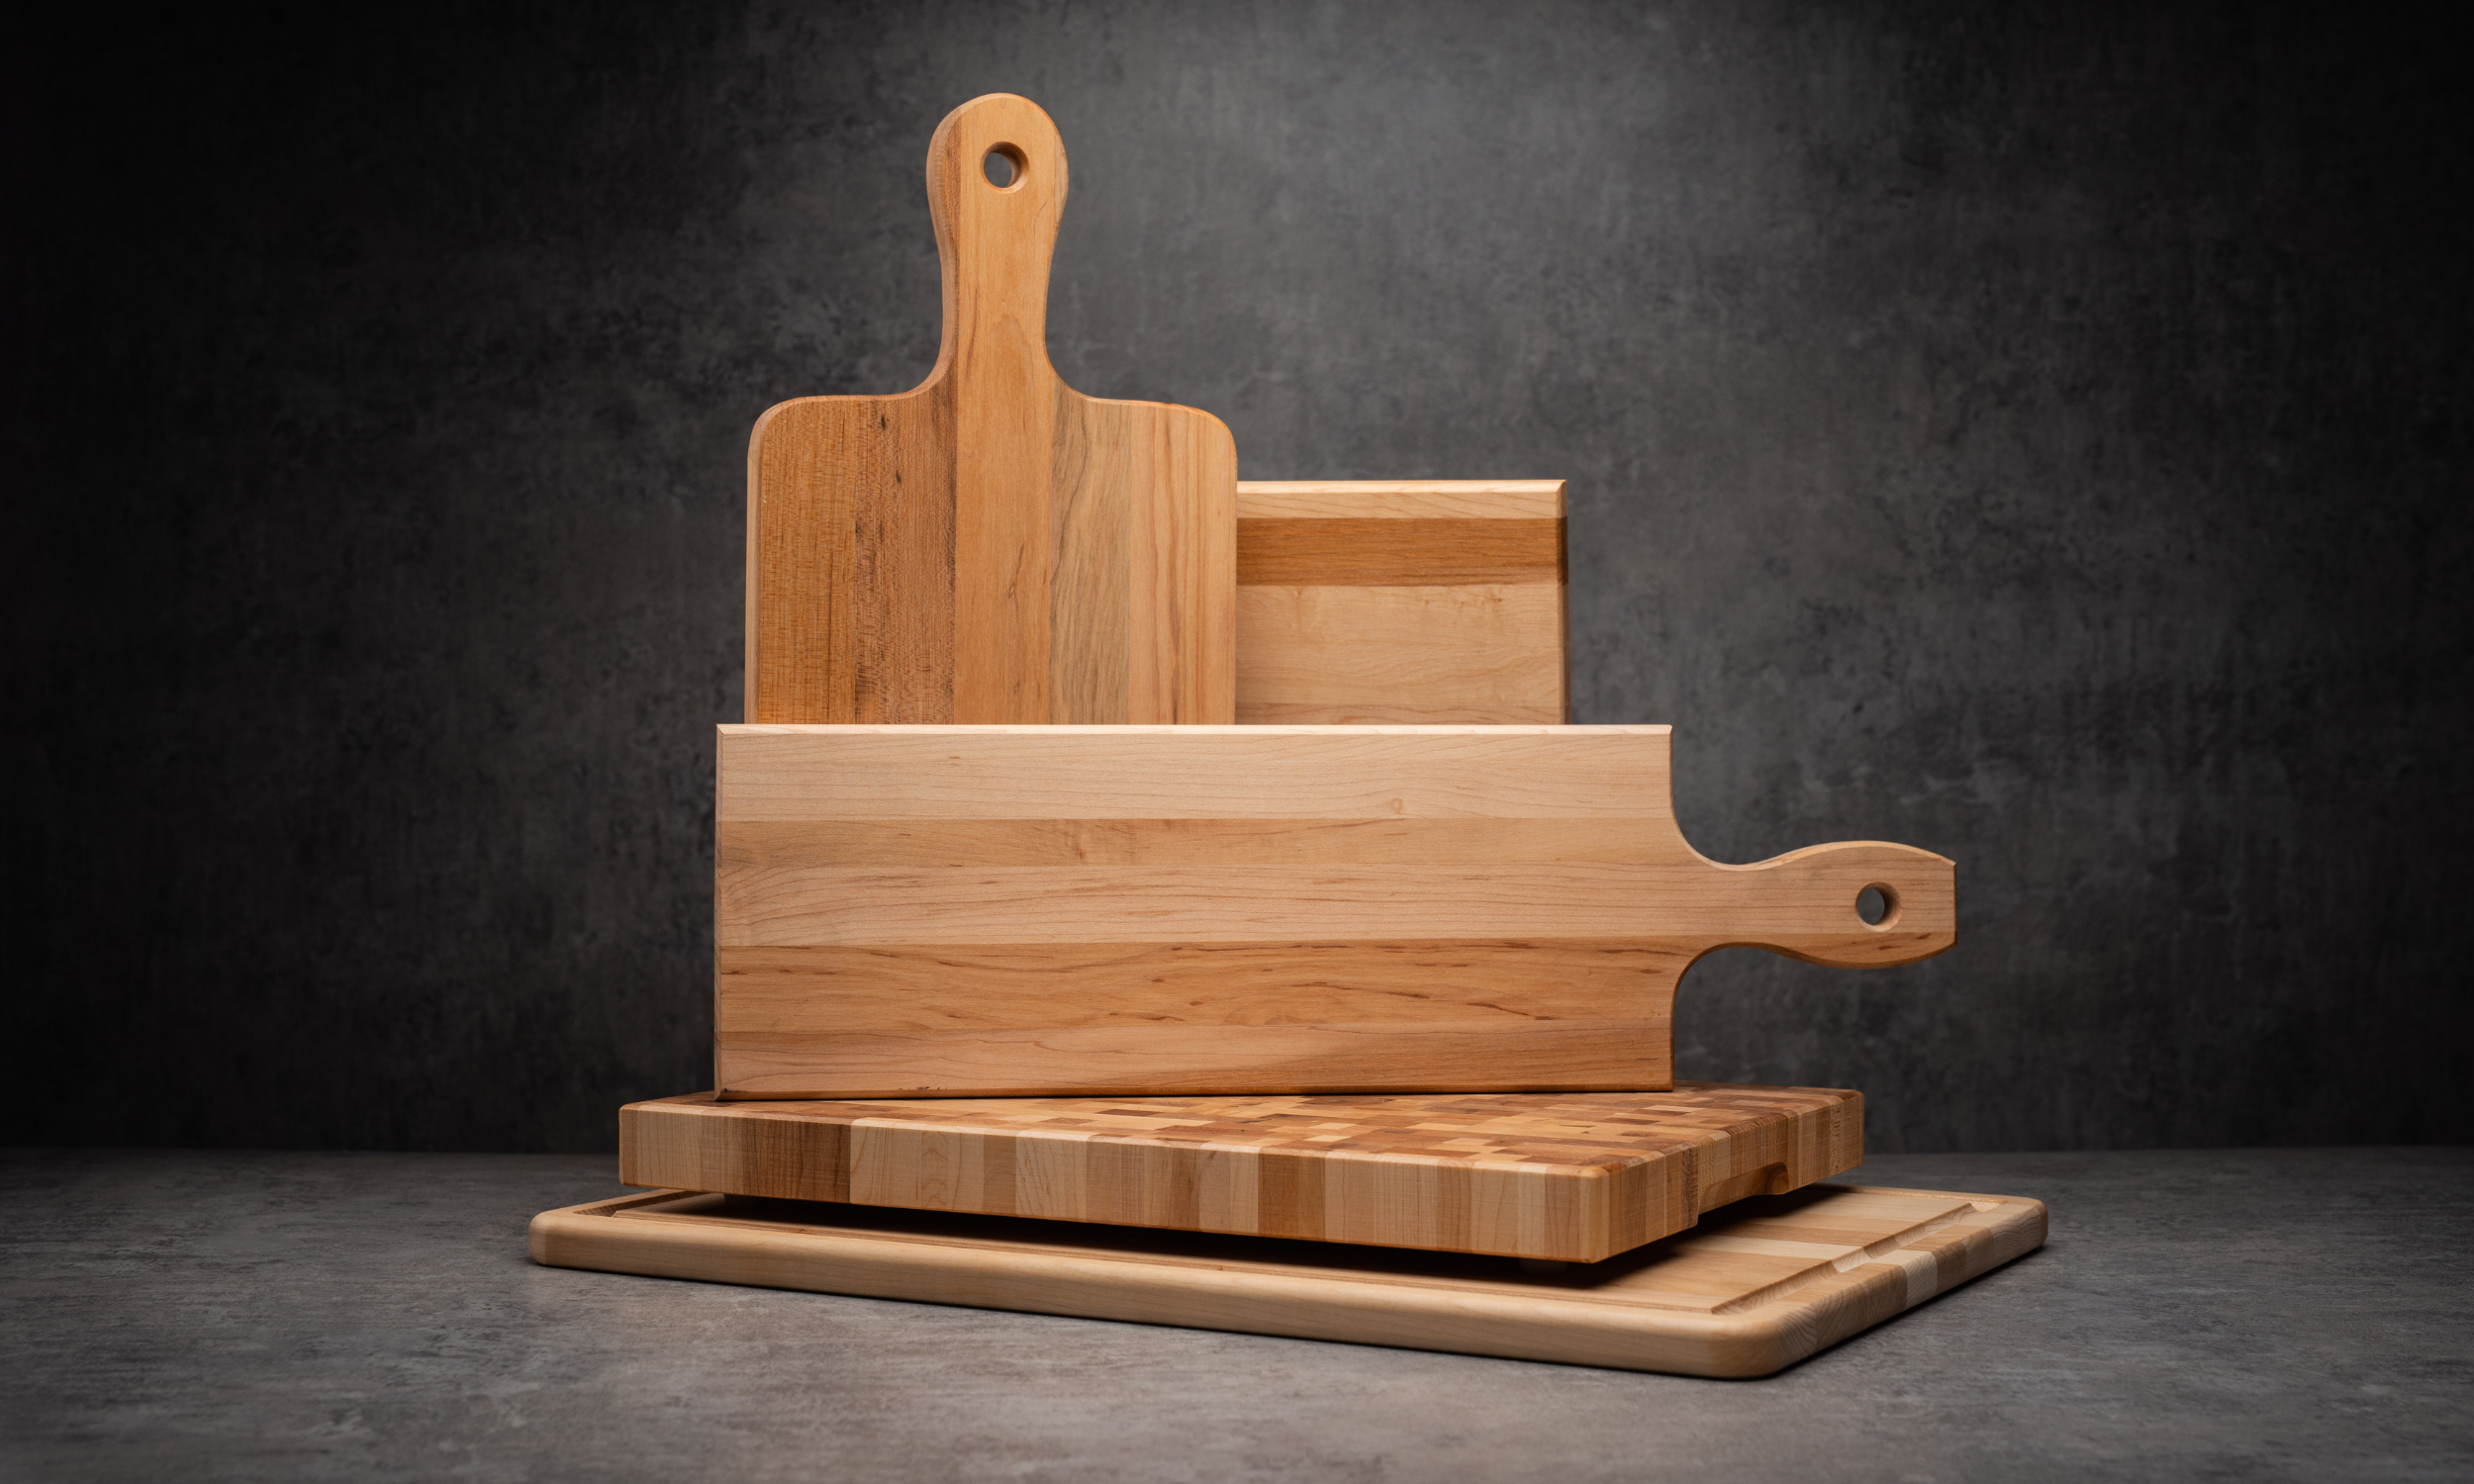 How to Choose a Commercial Cutting Board –